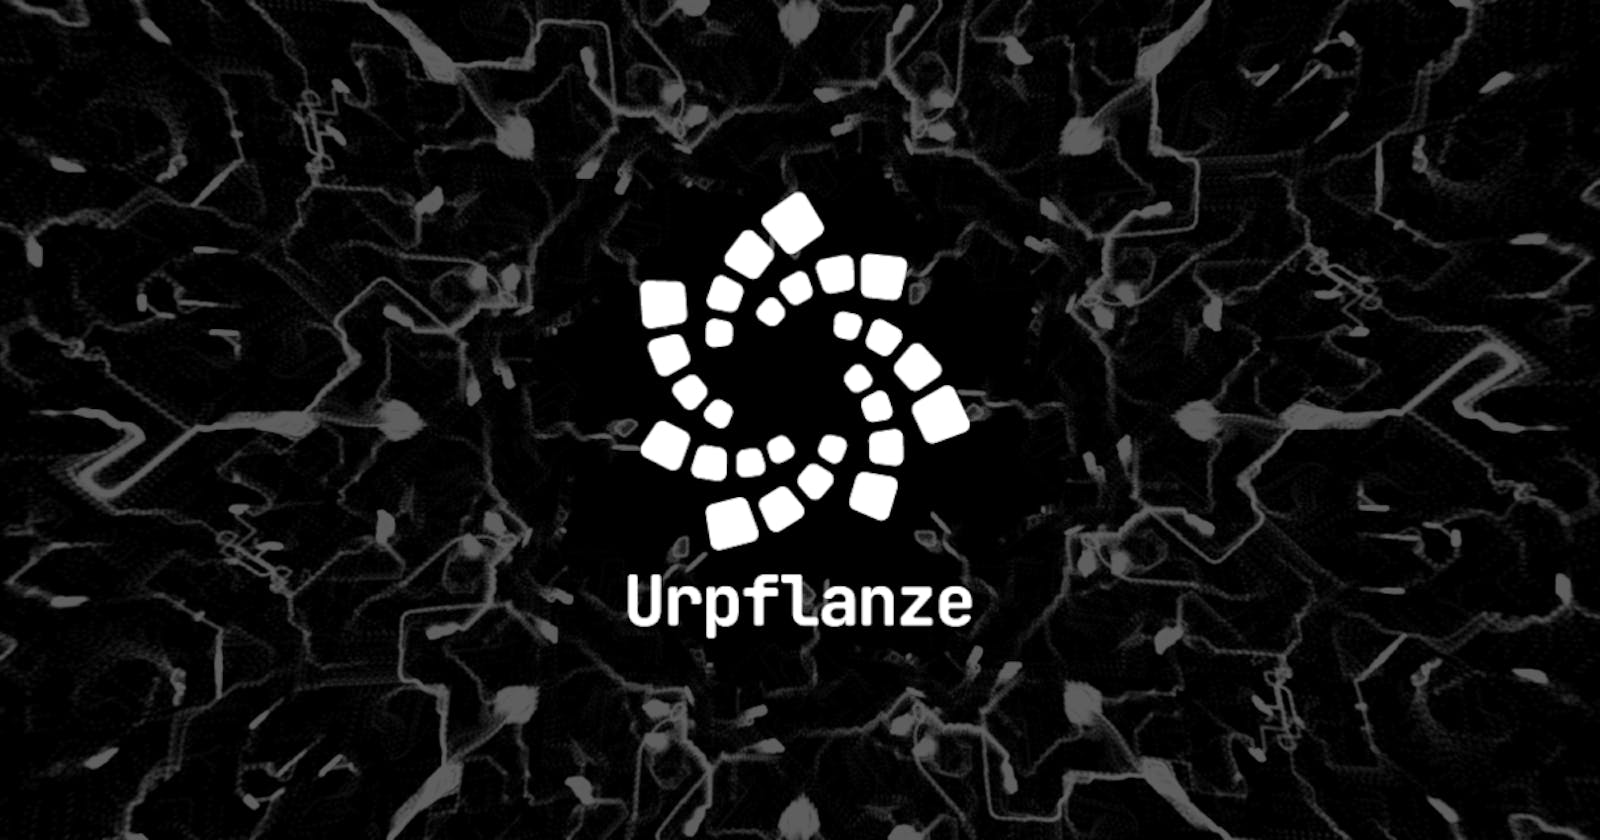 Urpflanze: JavaScript library for generative art and creative coding